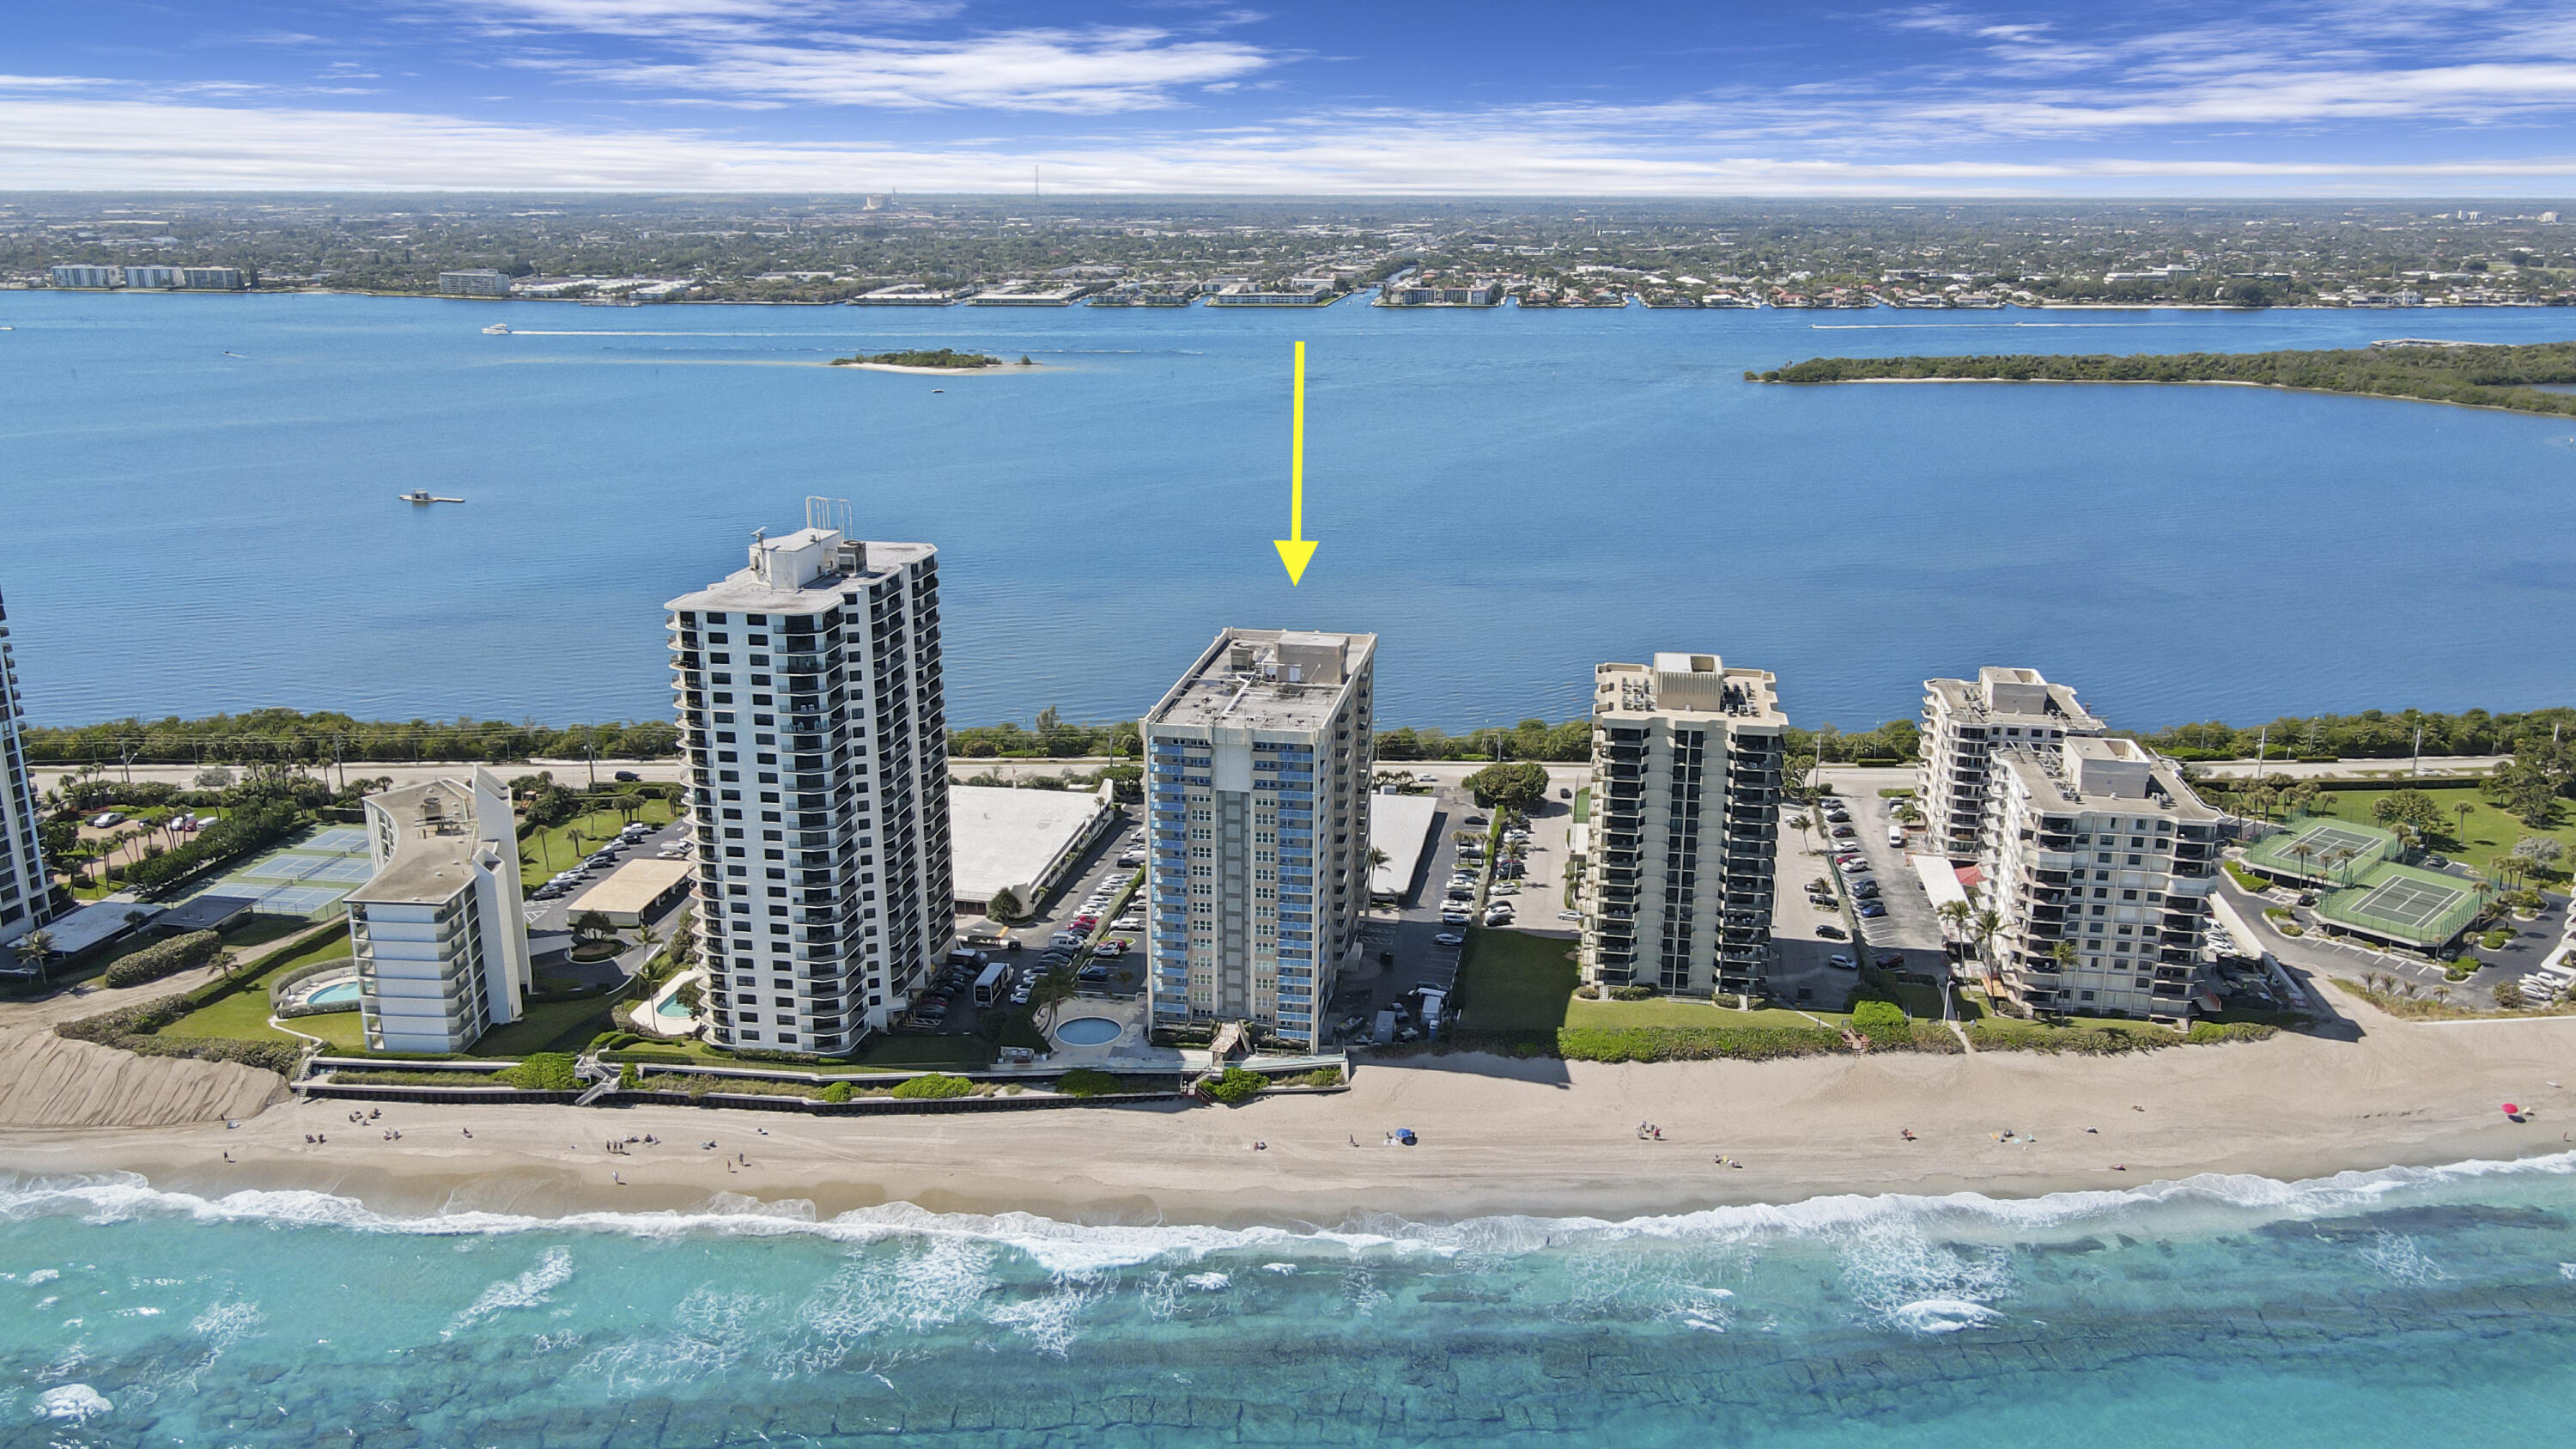 PET FRIENDLY - DIRECTLY ON OCEAN - WRAP AROUND BALCONY! This 2nd floor condo has some nice water views of the ocean and intracoastal. A unit in the same stack on the 11th floor is also for sale, so schedule to see both to see which you prefer. Interior has lots of potential to make it your own.  The kitchen can be totally opened up with a kitchen island overlooking the living room and water views. The condo unit is all impact glass sliding doors and windows. The Guest and Master bedrooms are both oversized with lots of closet space. There is a huge walk-in closet in the master bedroom. The condo has Washer/Dryer Hook-up & comes with covered parking! The unit also comes with an extra storage locker on the floor and bike storage. The Aquarius is located toward the preferred North end of... Singer Island, away from the hotels and timeshares, Aquarius has a beautiful private beach to enjoy year round. The Aquarius also has a new exercise room, sauna, billiard room, community room with kitchen, library, BBQ area with built-in gas grills and large picnic seating area overlooking the ocean. Imagine relaxing on the beautiful pool deck overlooking the beach the beach or lounging on the beach only a few steps away. Singer Island located is close to shops restaurants and the airport. Pet Friendly Building, dogs allowed up to 20lbs. Rentals permitted in 1st yr of ownership. Don't miss out on this fabulous unit located on Singer Island!